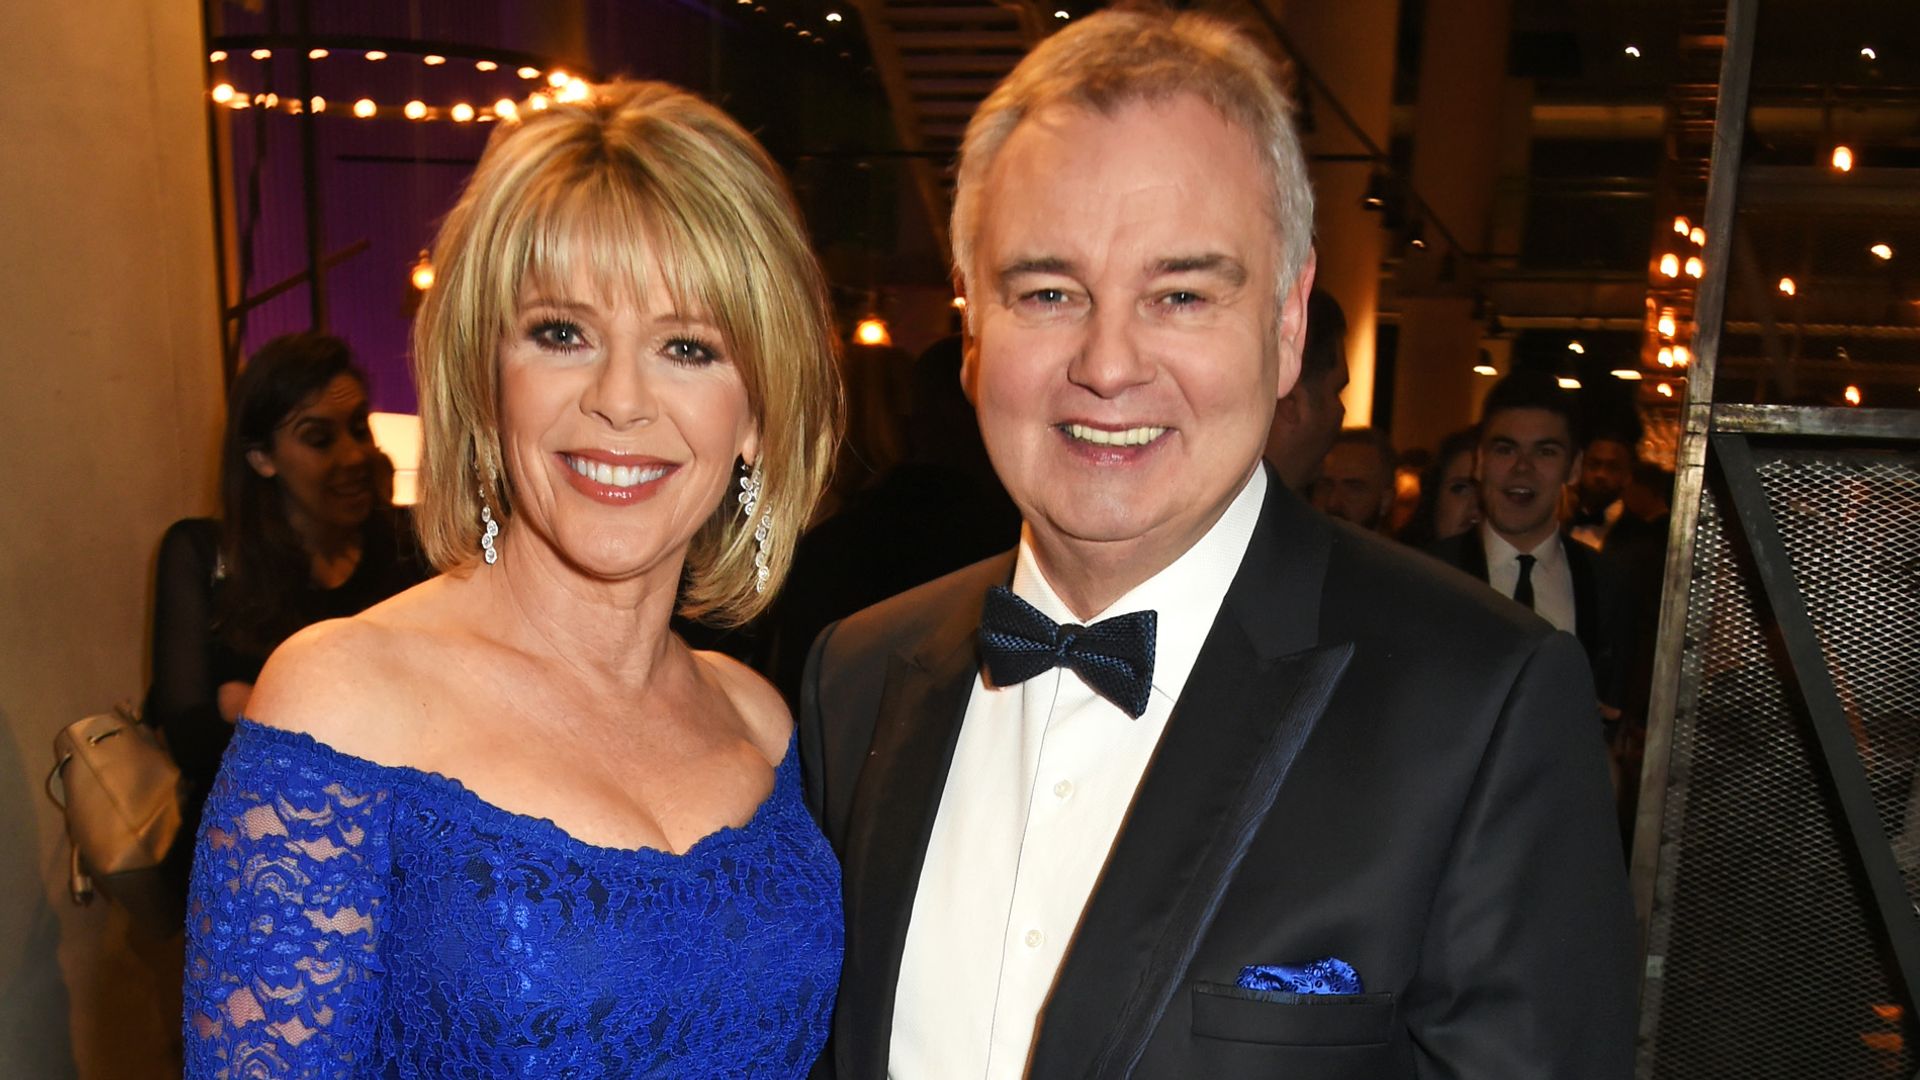 Ruth Langsford reveals surprising 'fear' over potential split from Eamonn Holmes